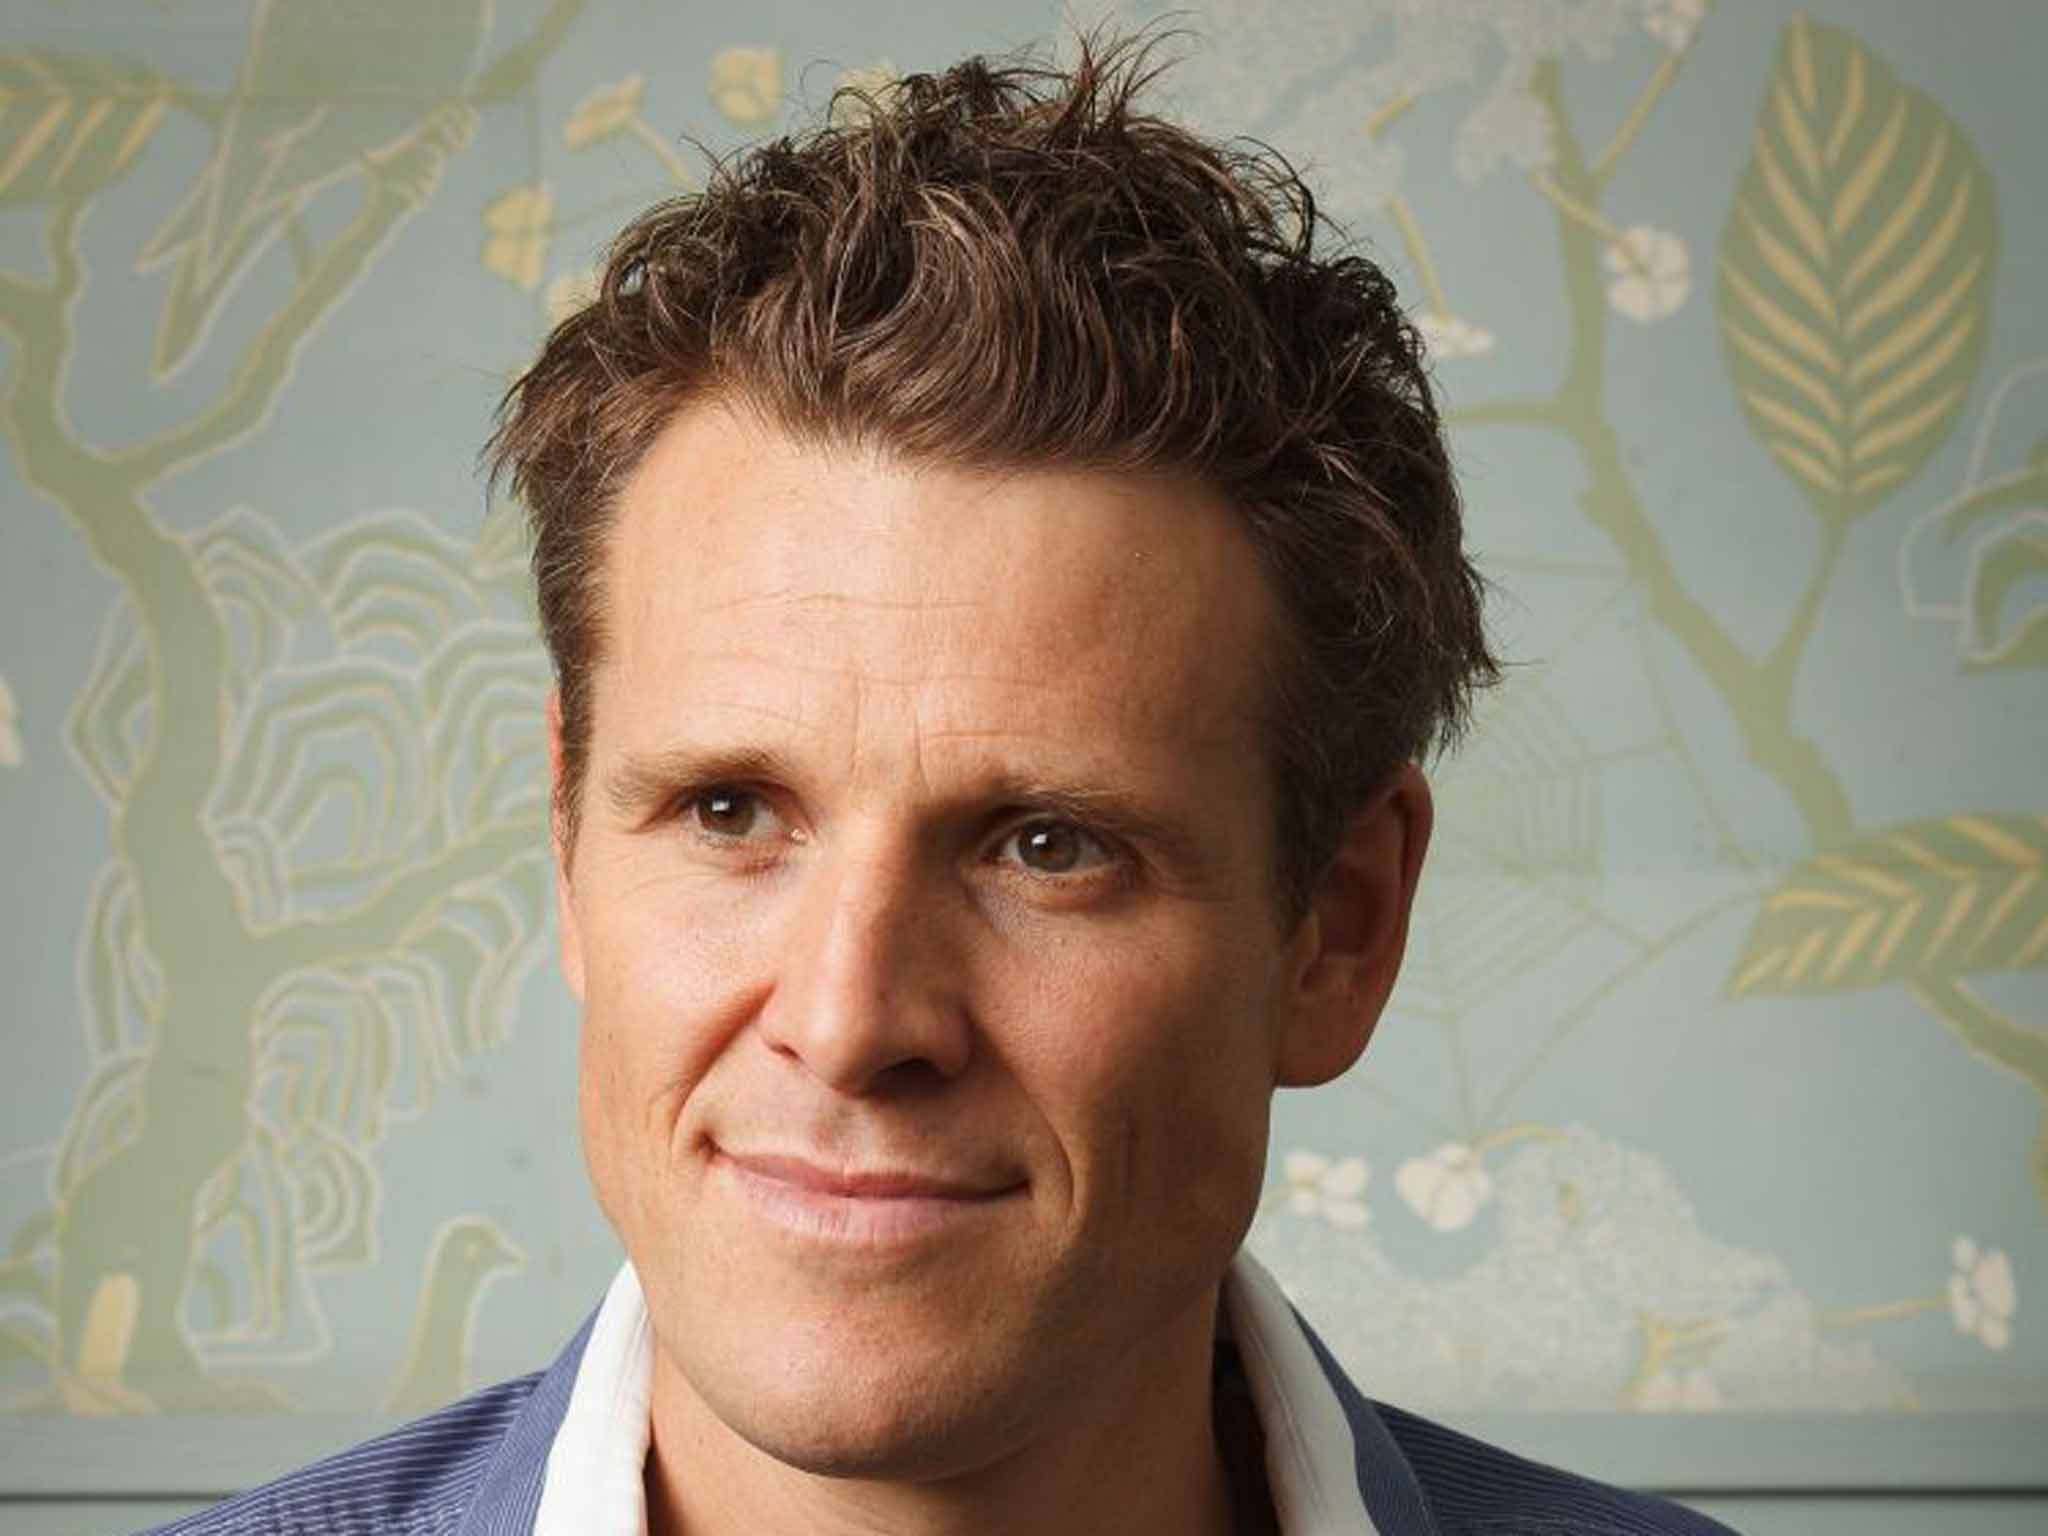 Olympic rower James Cracknell